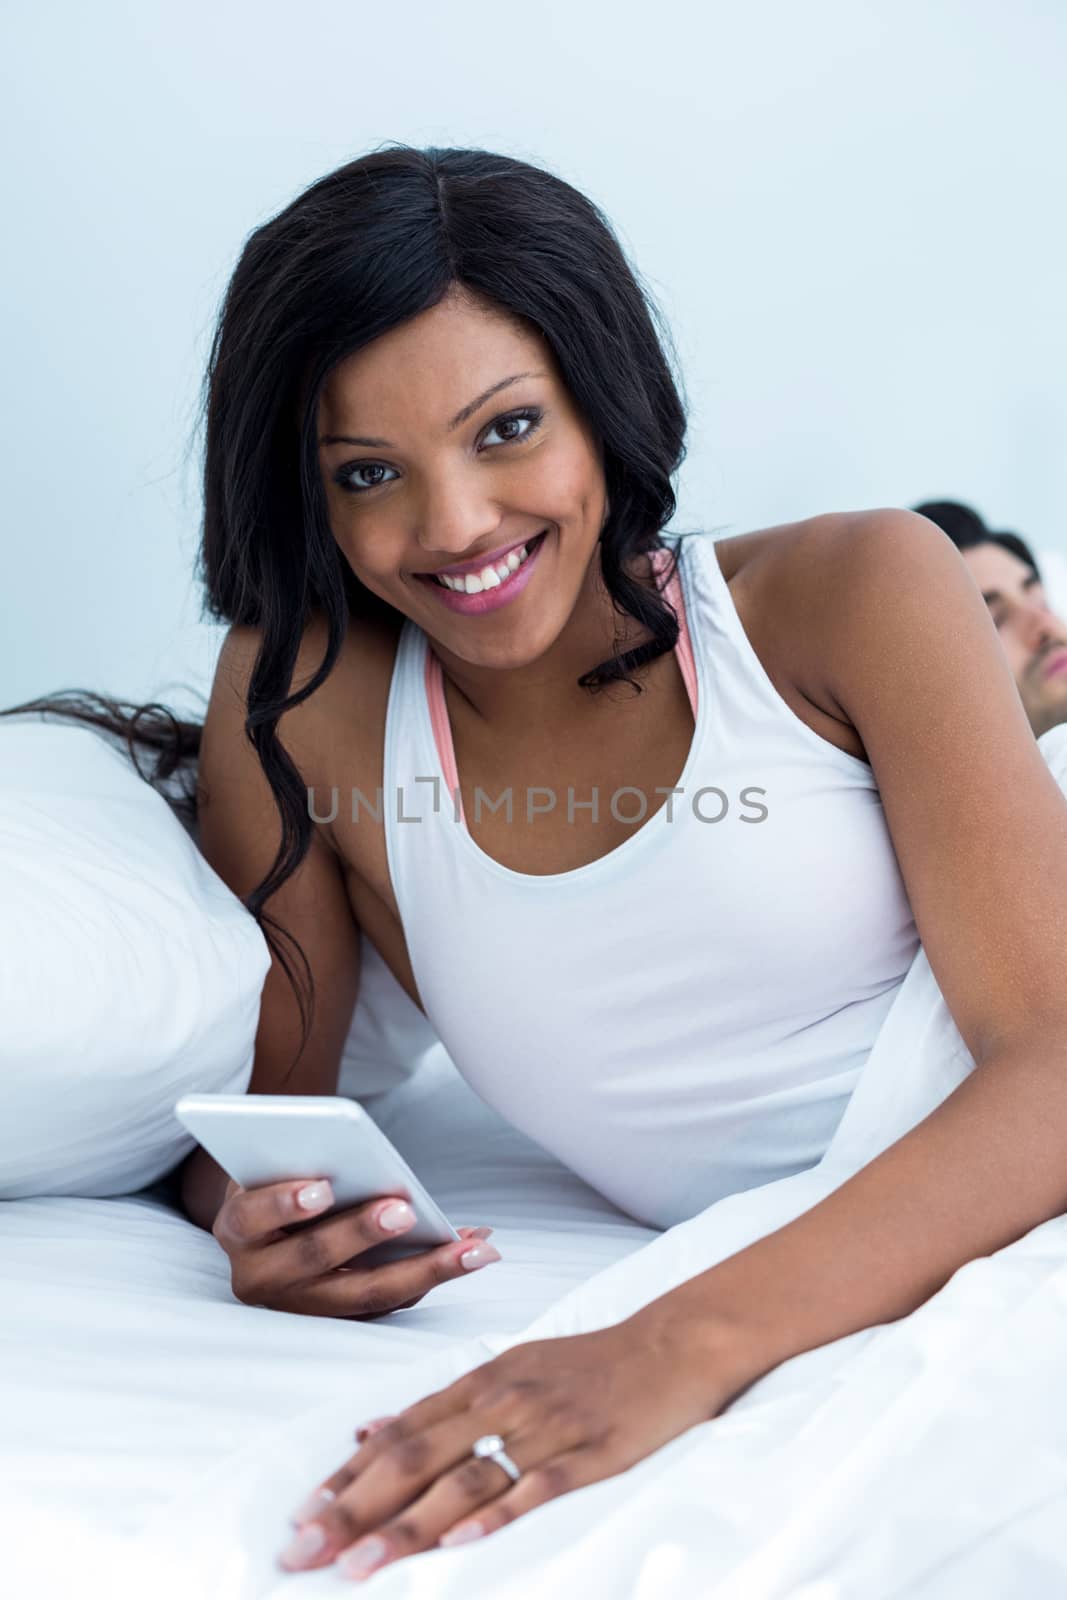 Woman using mobile phone while man sleeping on bed by Wavebreakmedia